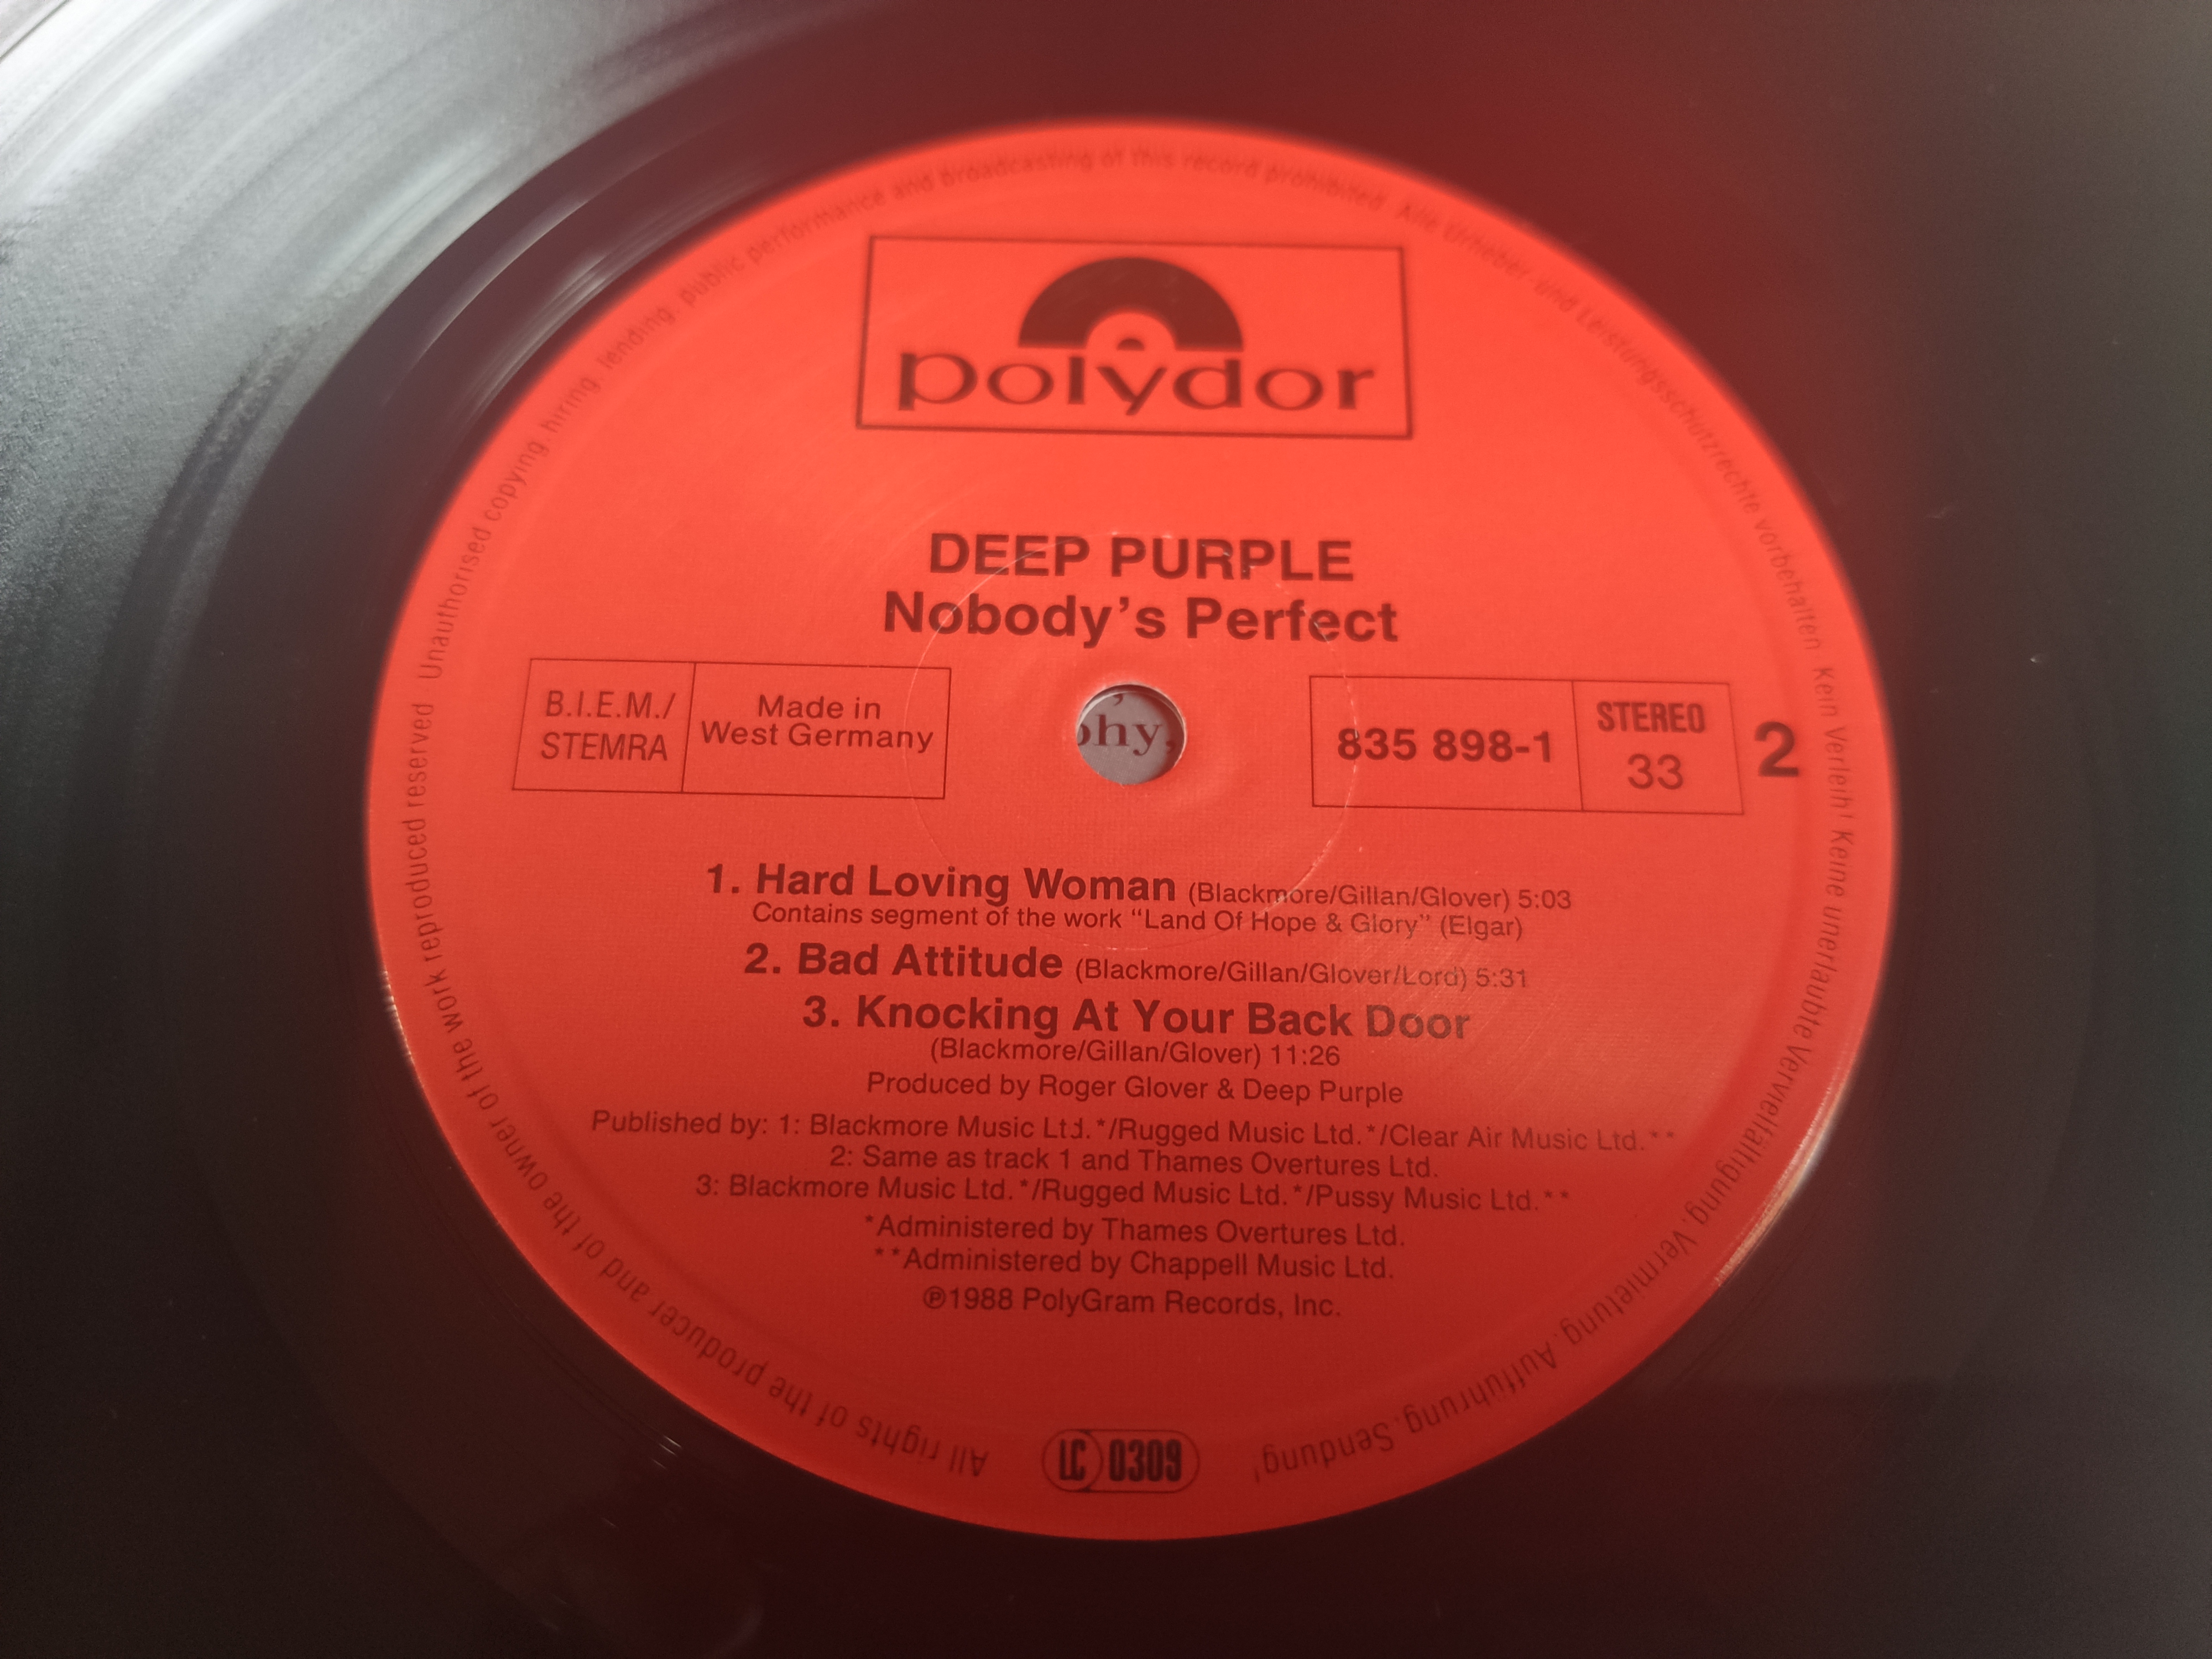 Deep Purple - Nobody's Perfect Double LP - Europe 1988 First Pressing. Ex To NM Condition. - Image 4 of 7